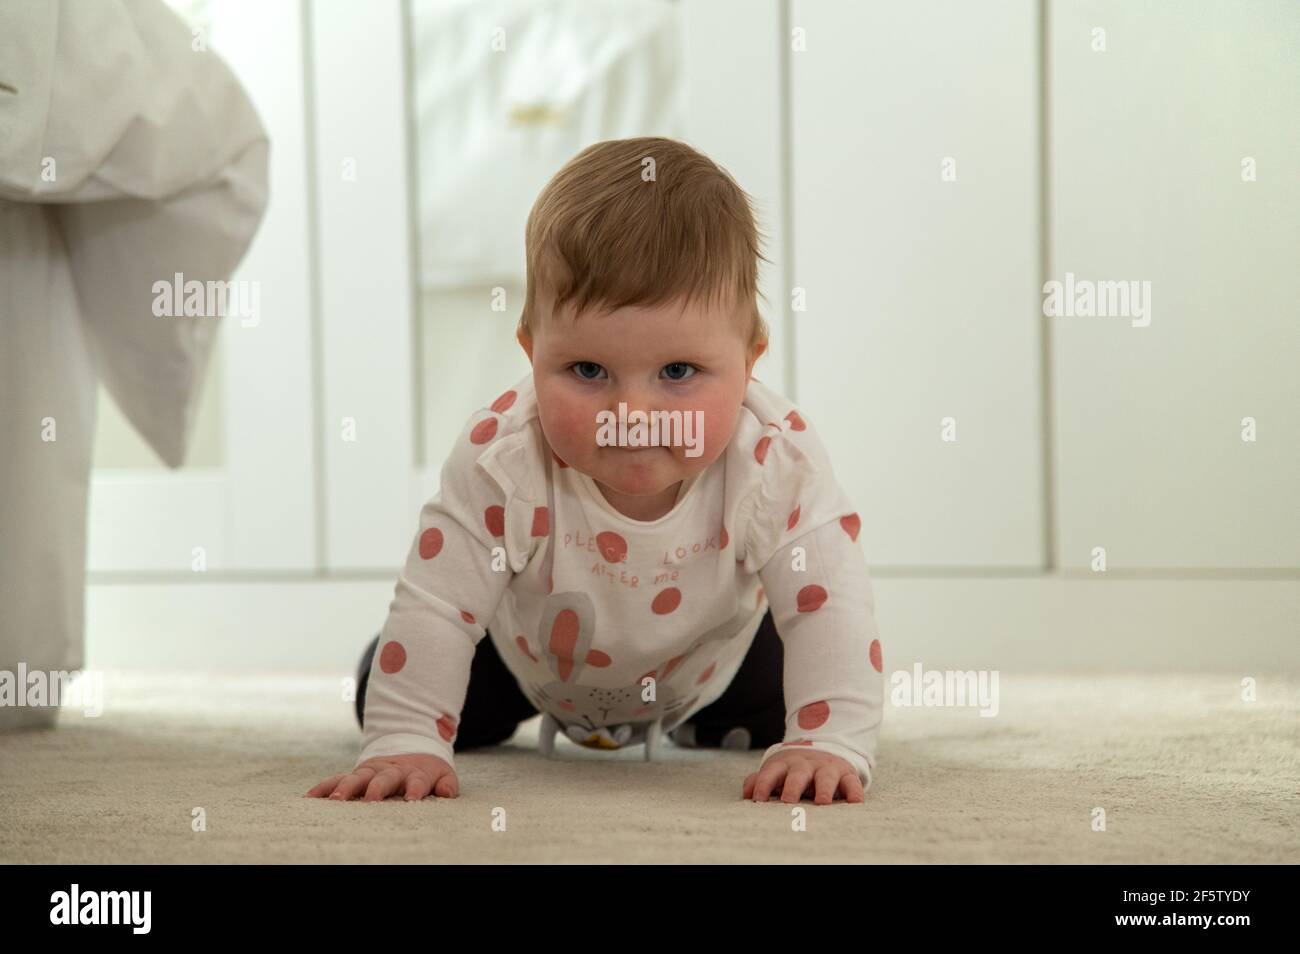 A 10 month old baby learning to crawl on all fours Stock Photo